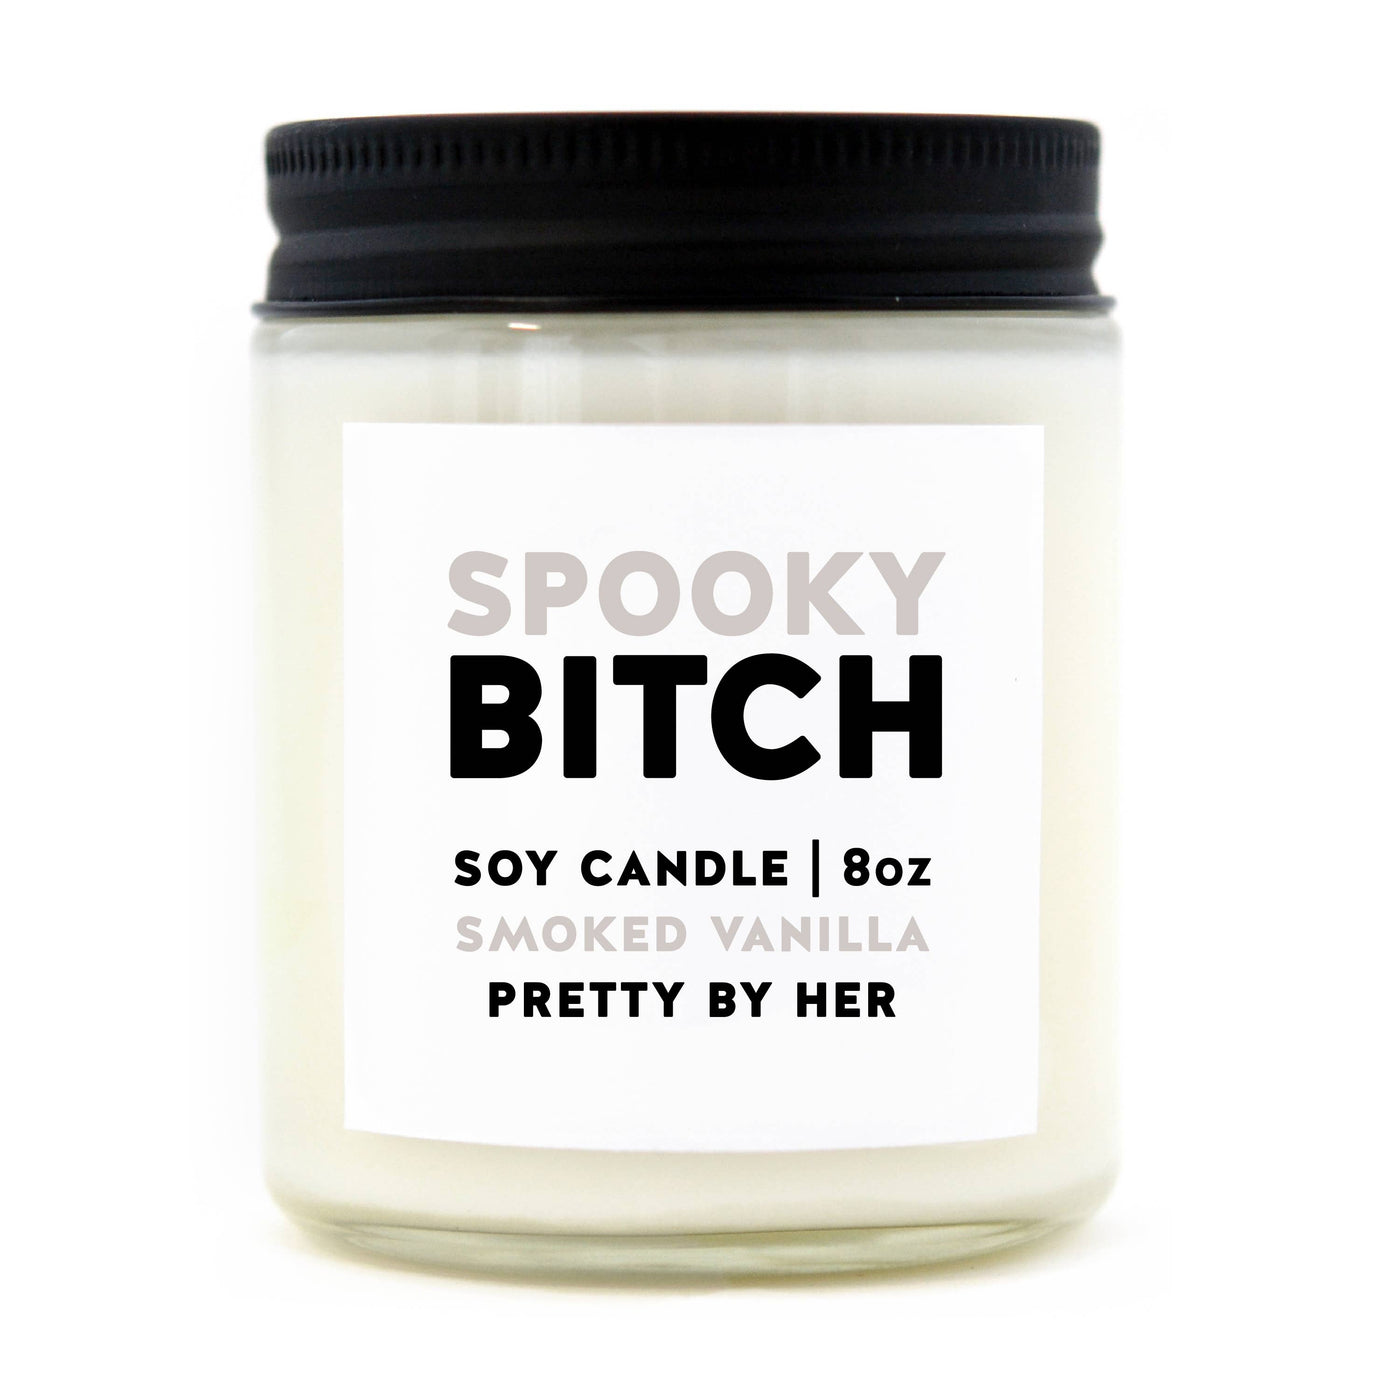 Spooky Bitch Soy Candle | Funny Halloween Candle